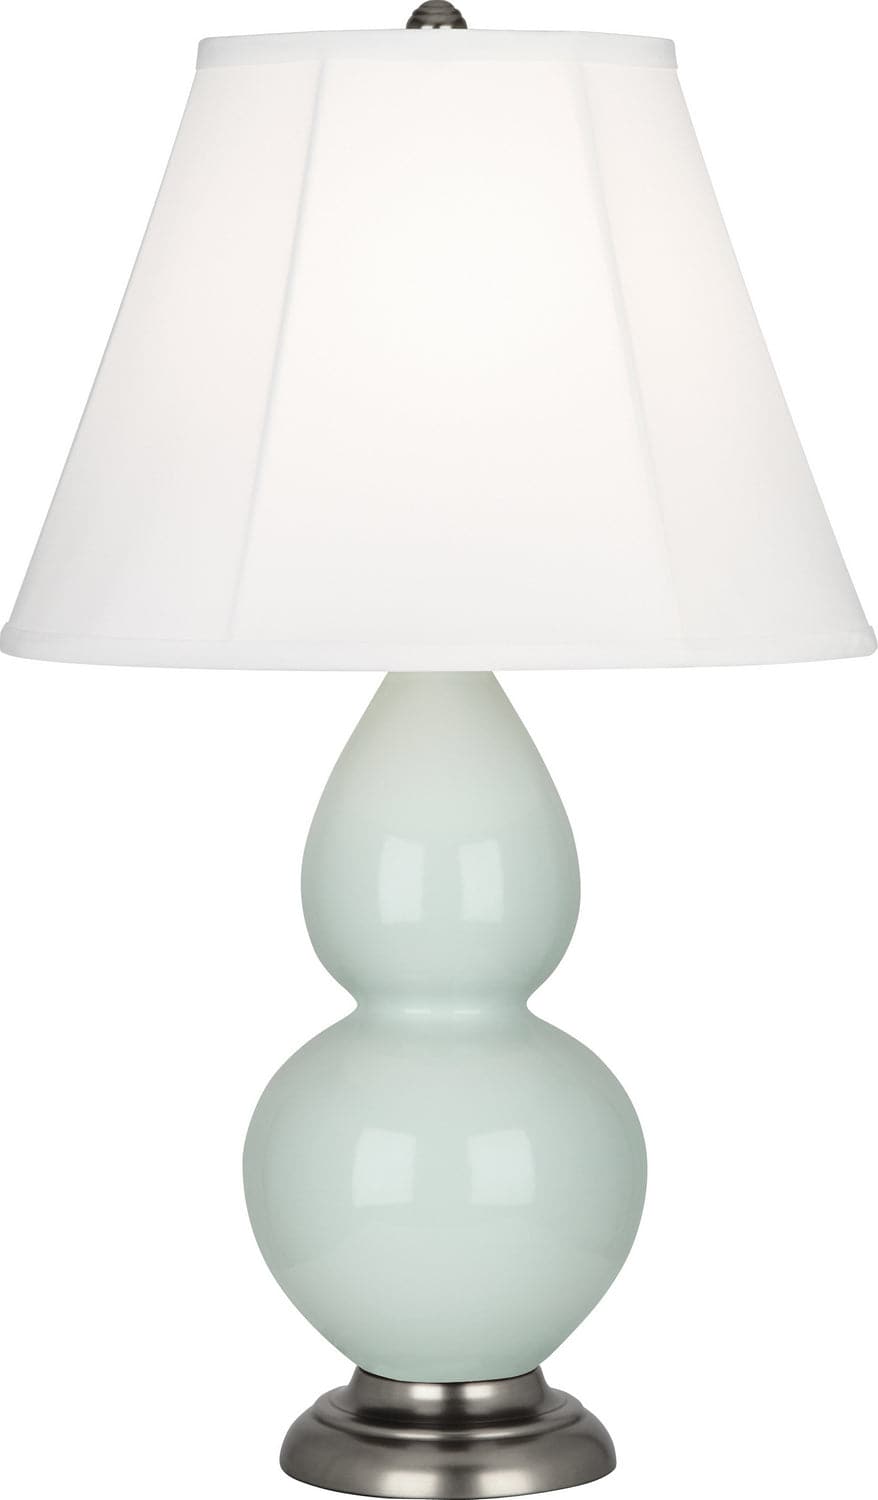 Robert Abbey - 1788 - One Light Accent Lamp - Small Double Gourd - Celadon Glazed